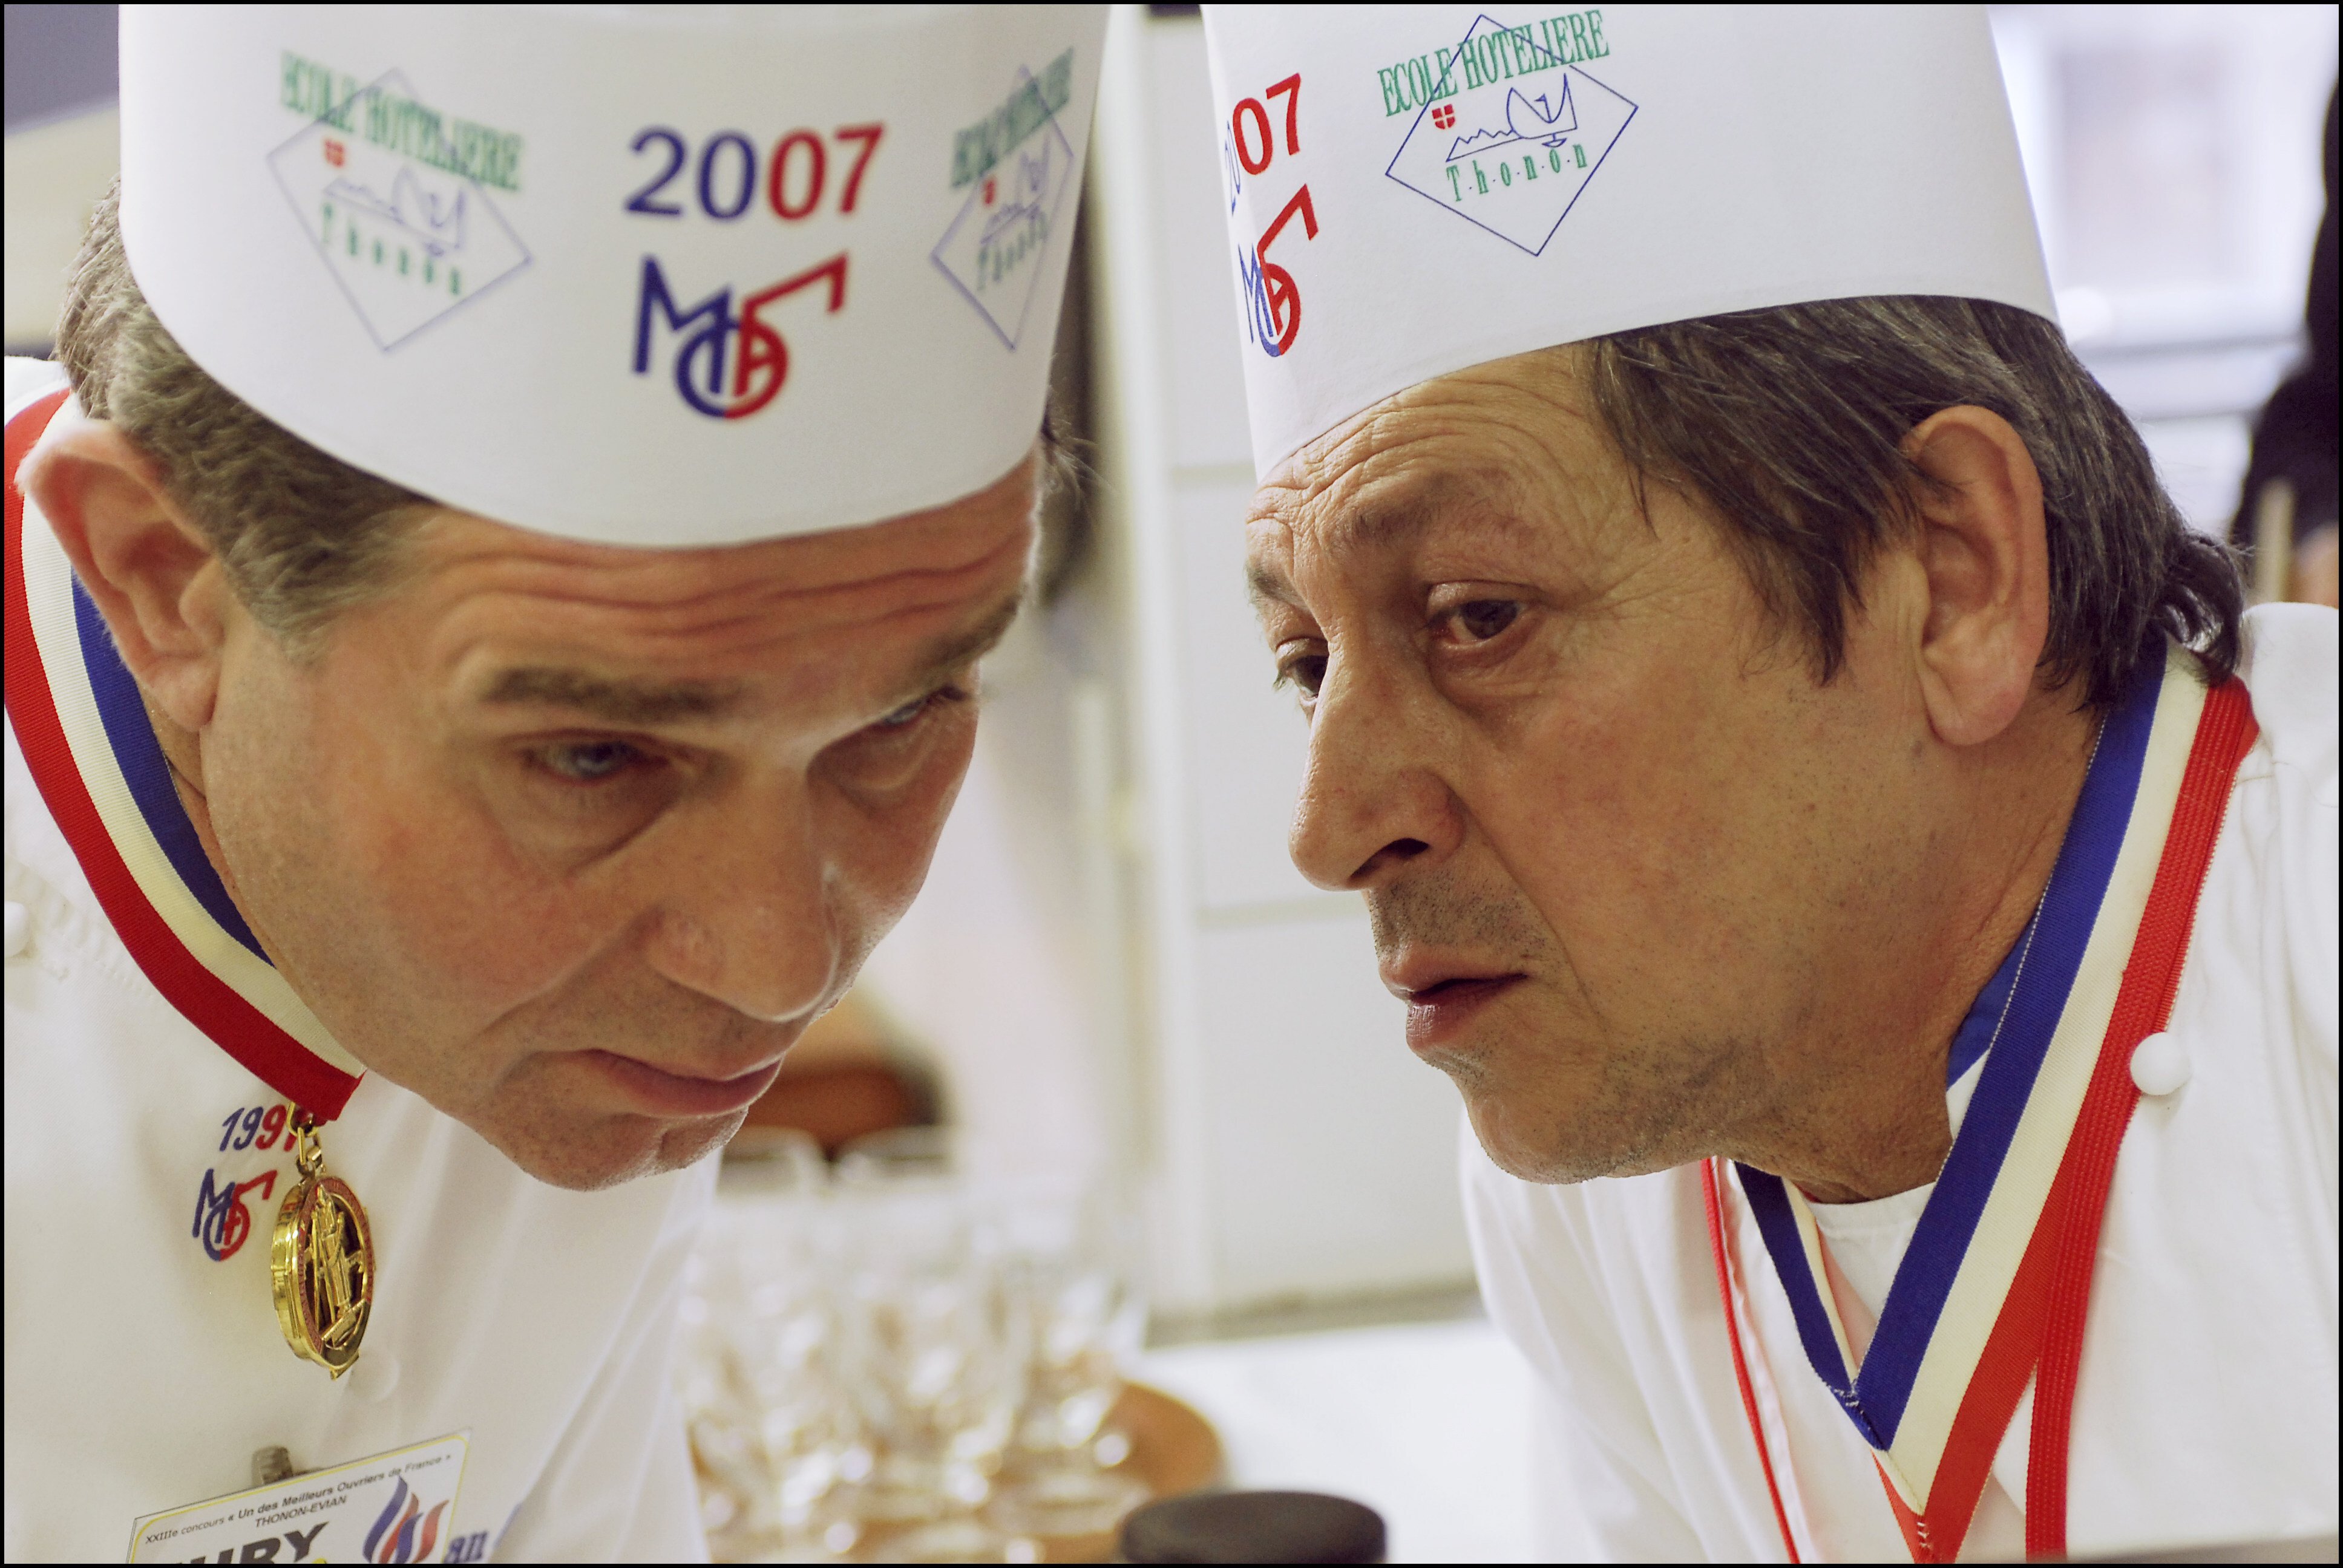 Jacques Maximin (right) speaks with Jean-Marc Delatour during the World Best Chefs competition in Thonon-Les-Bains, France in 2007. Photo: Getty Images